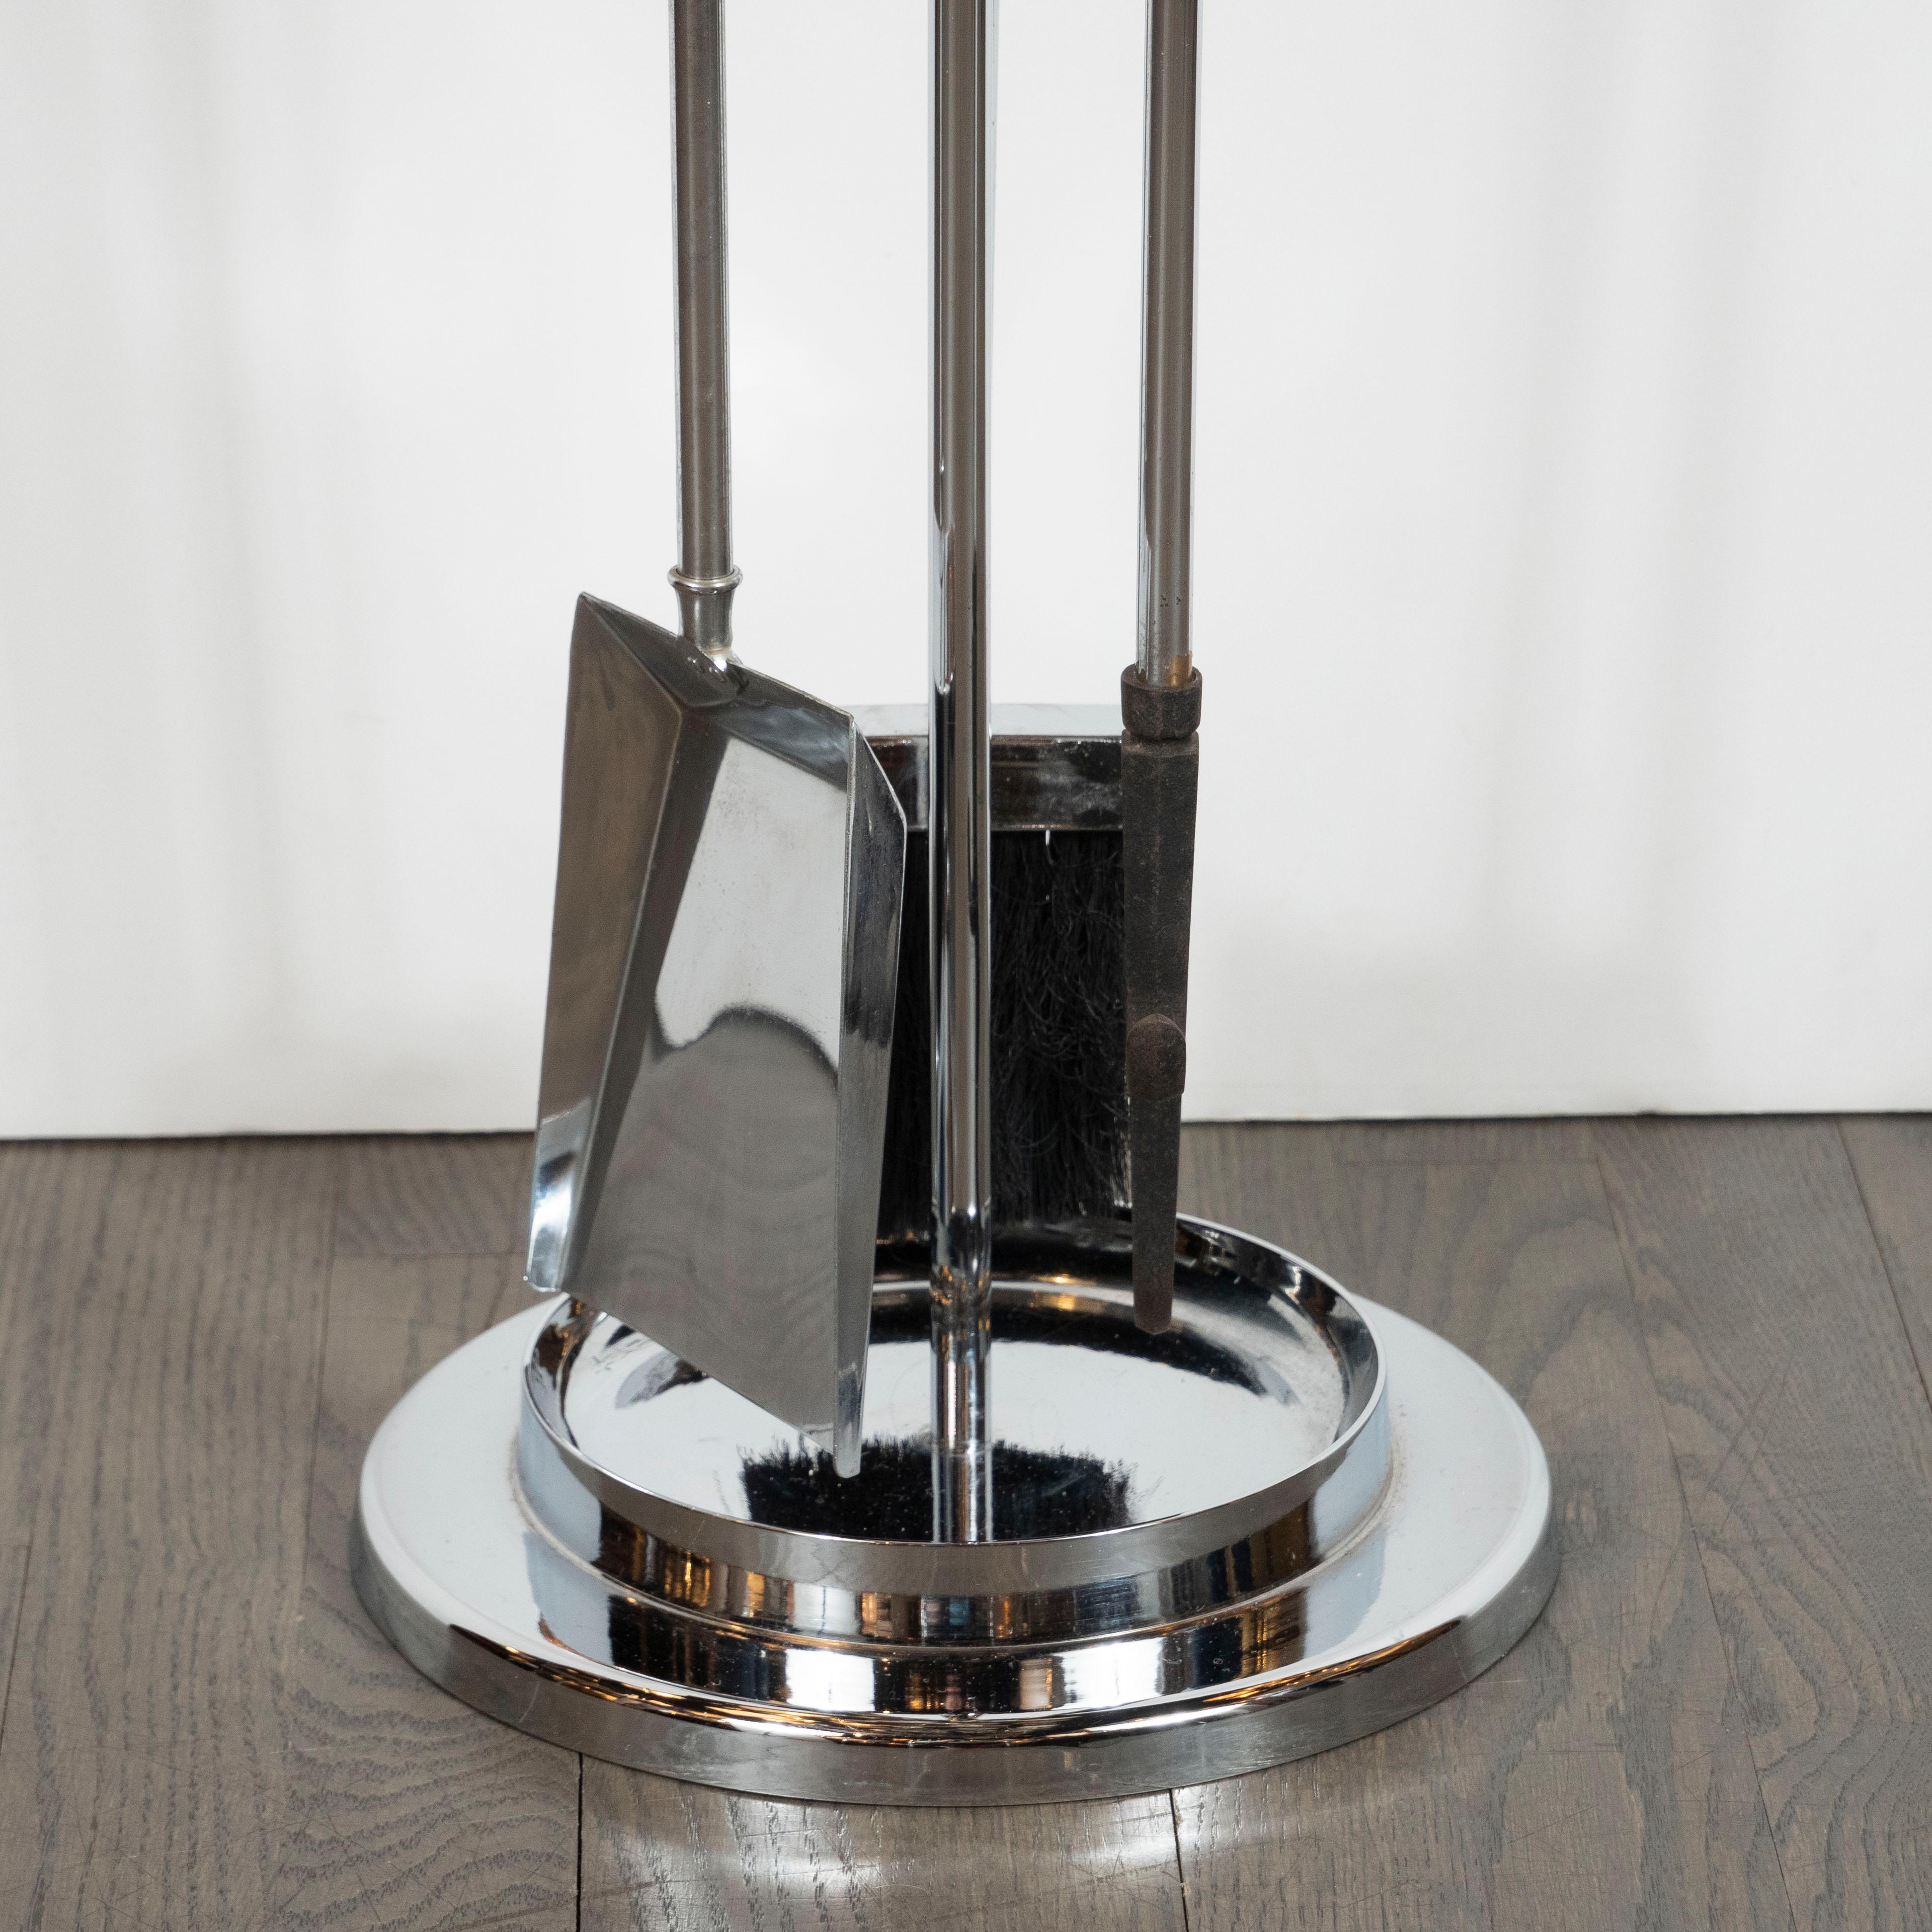 This refined Mid-Century Modern fireplace tool set includes stand, shovel, brush, and poker realized in lustrous polished chrome with translucent Lucite handles cut at a bias. The stand offers a circular base and a circular tier with indentations